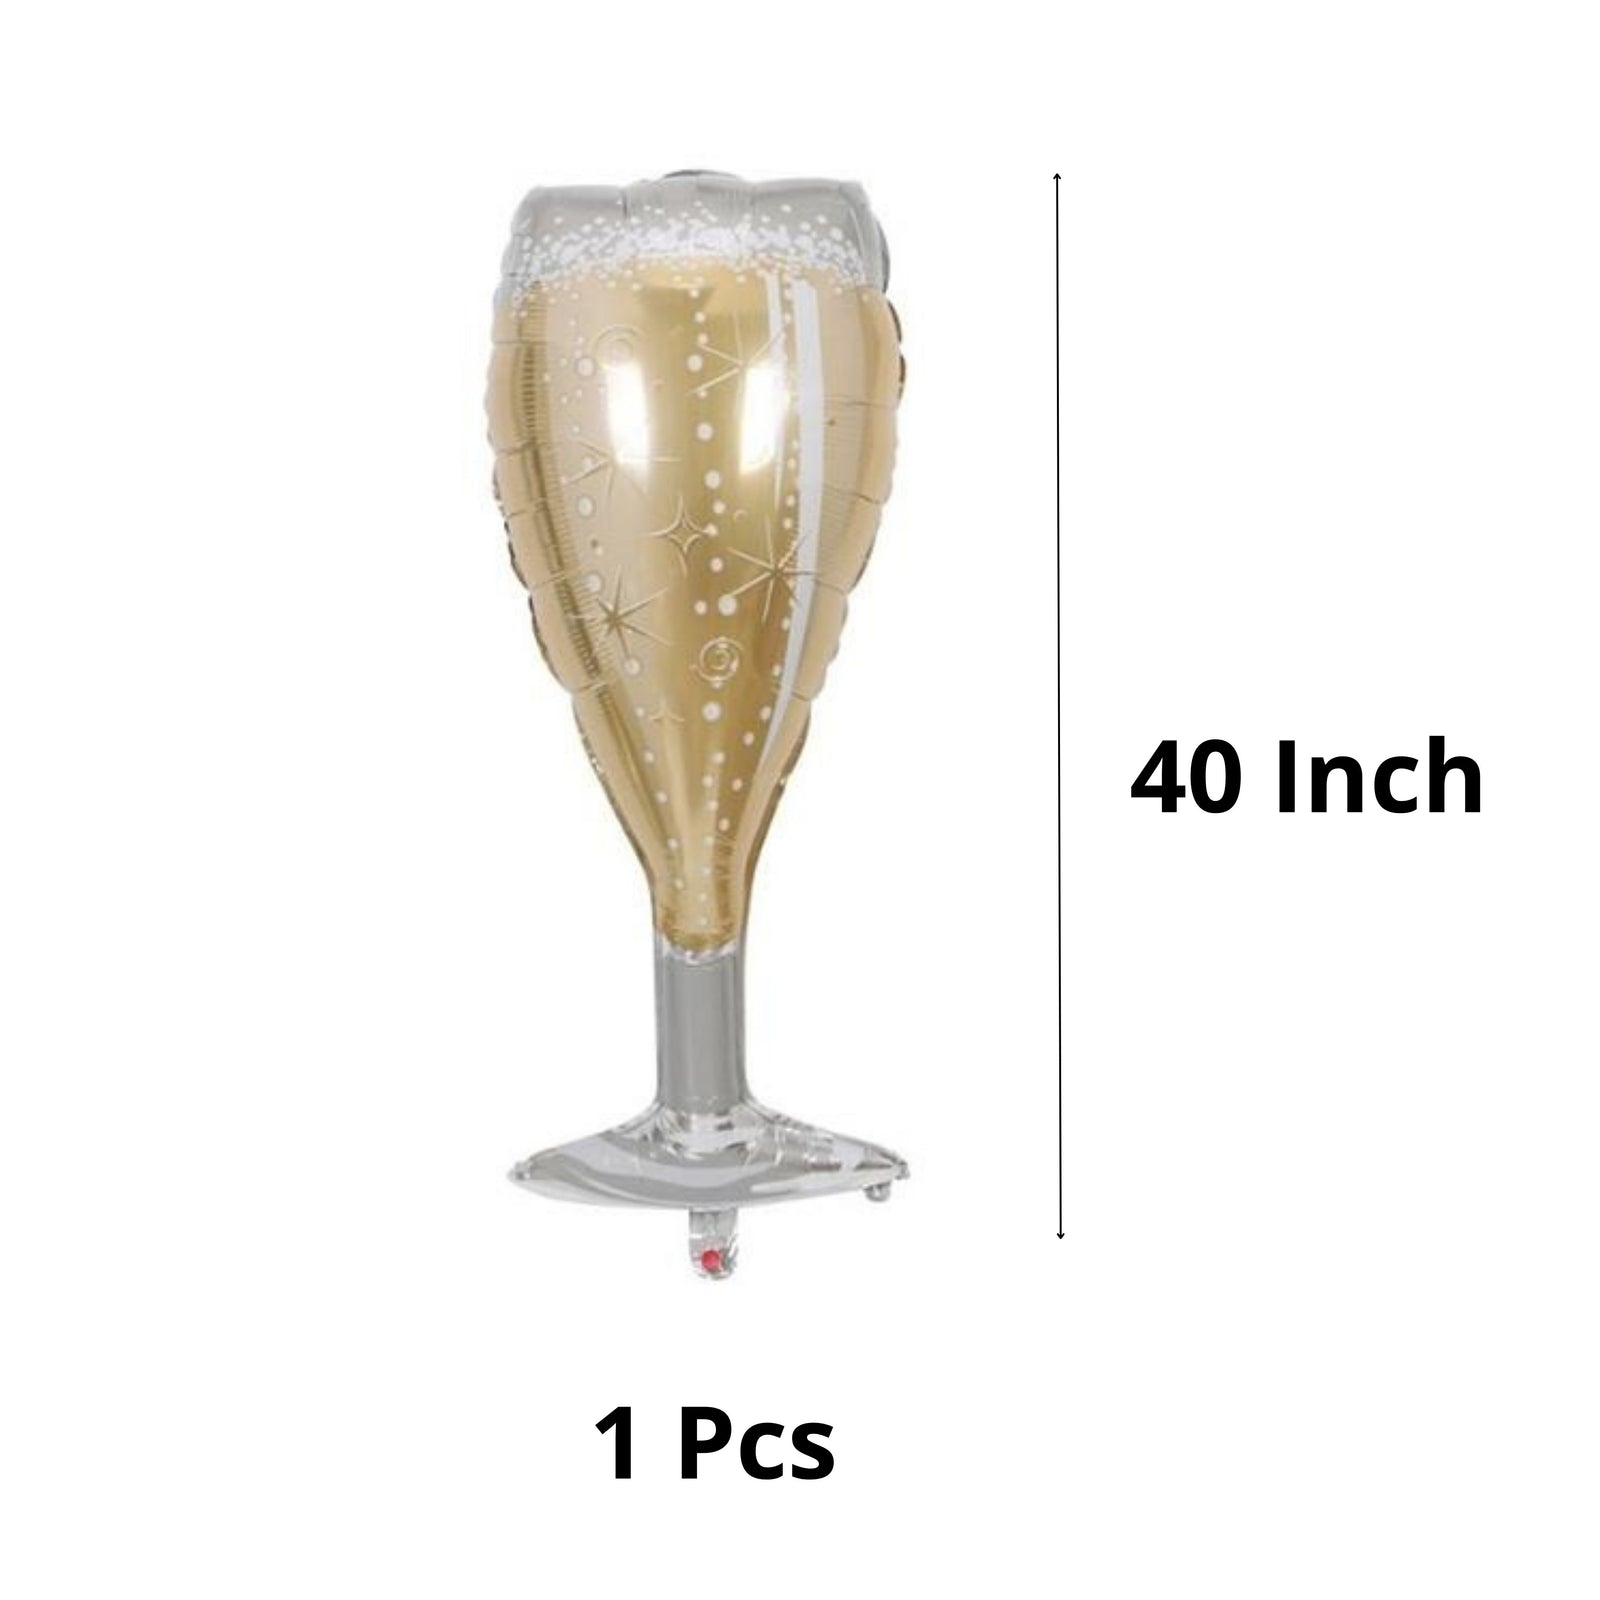 Champaign Glass Foil Balloon for Bachelor's, birthdays &amp; anniversaries decorations